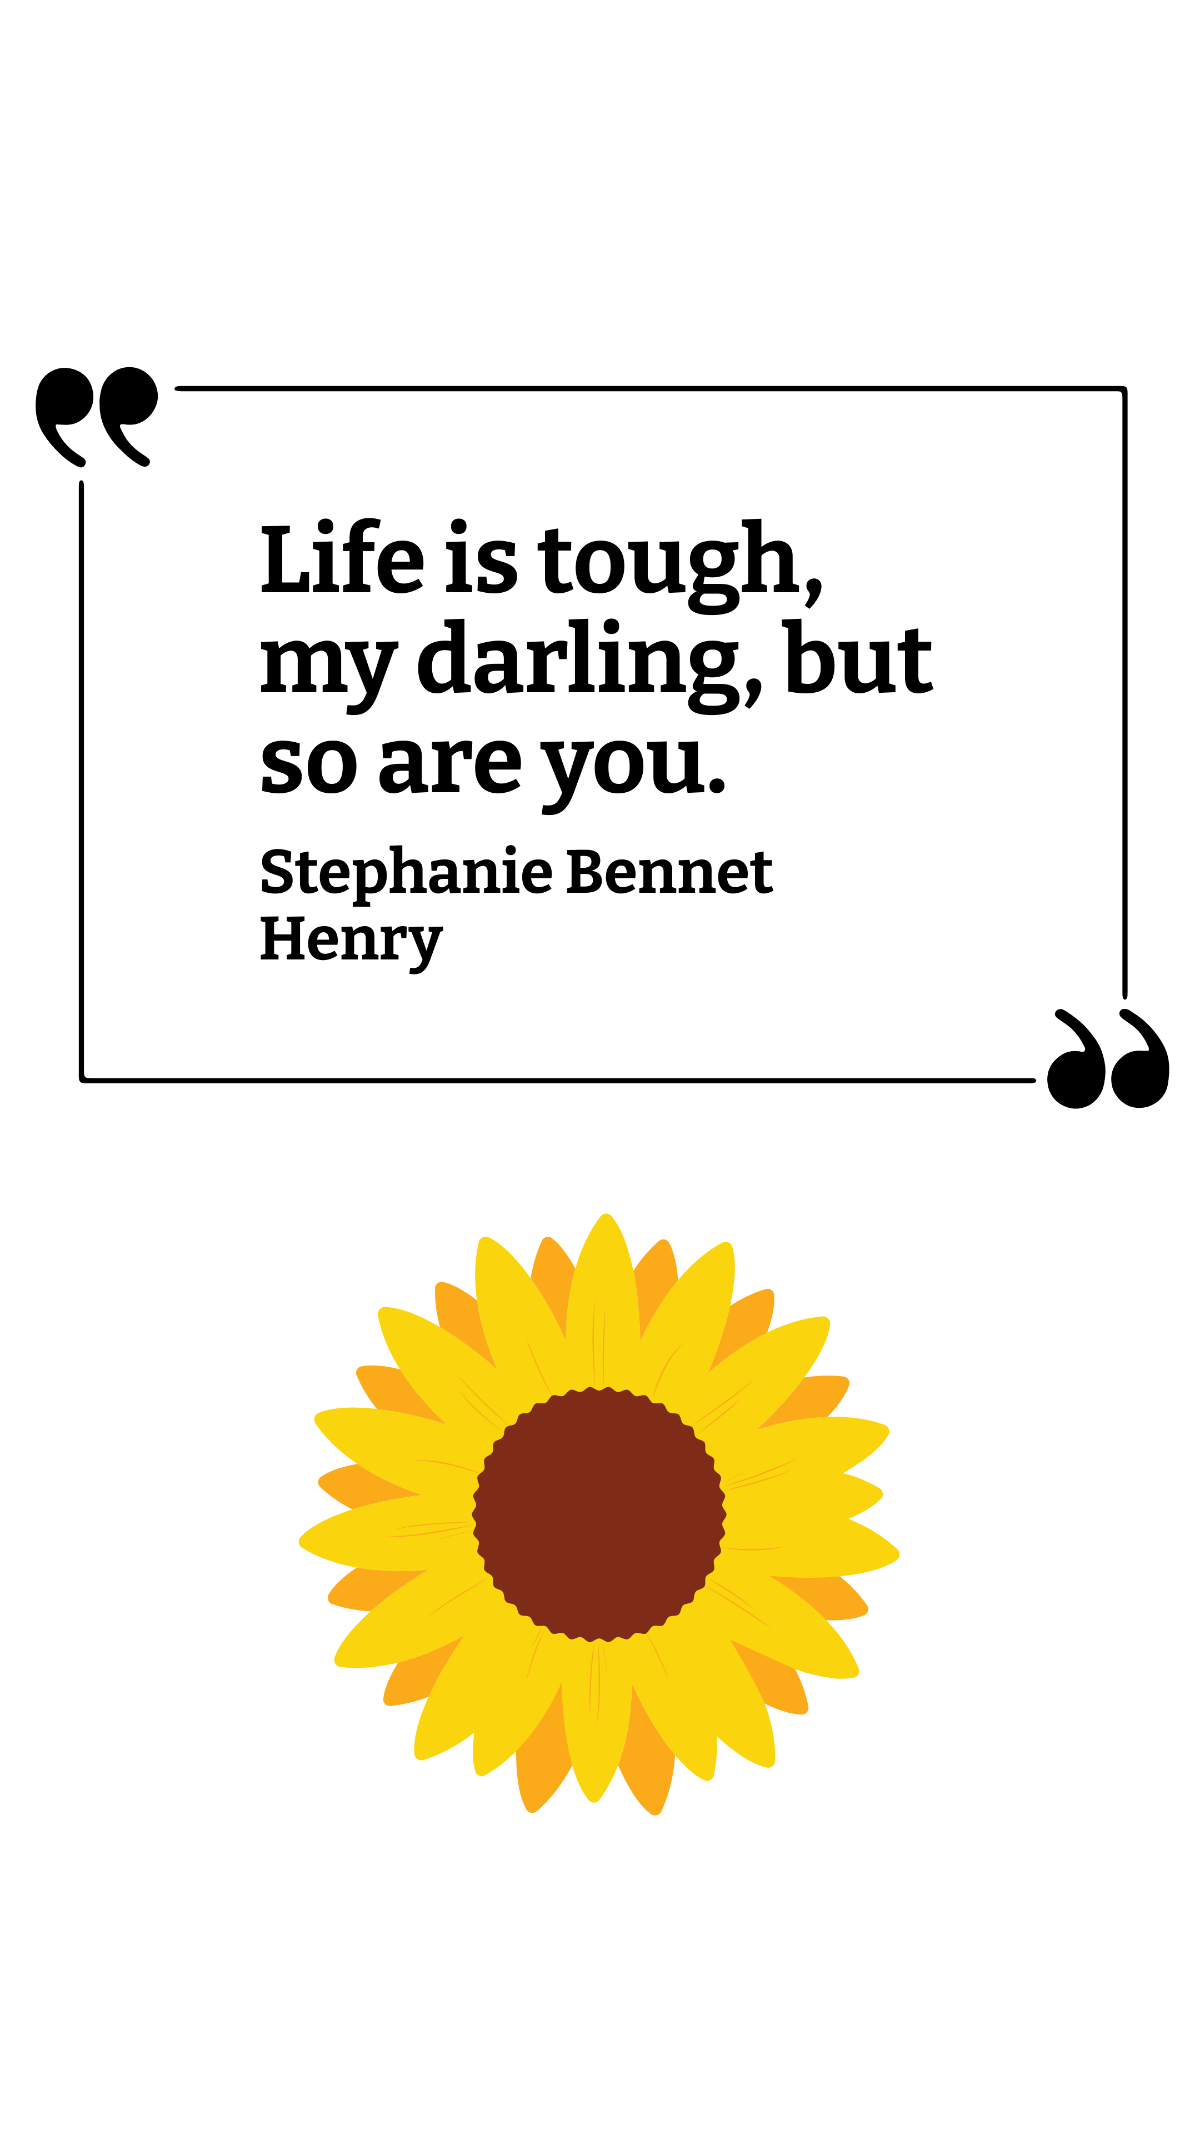 Free Stephanie Bennet Henry - Life is tough, my darling, but so are you. Template